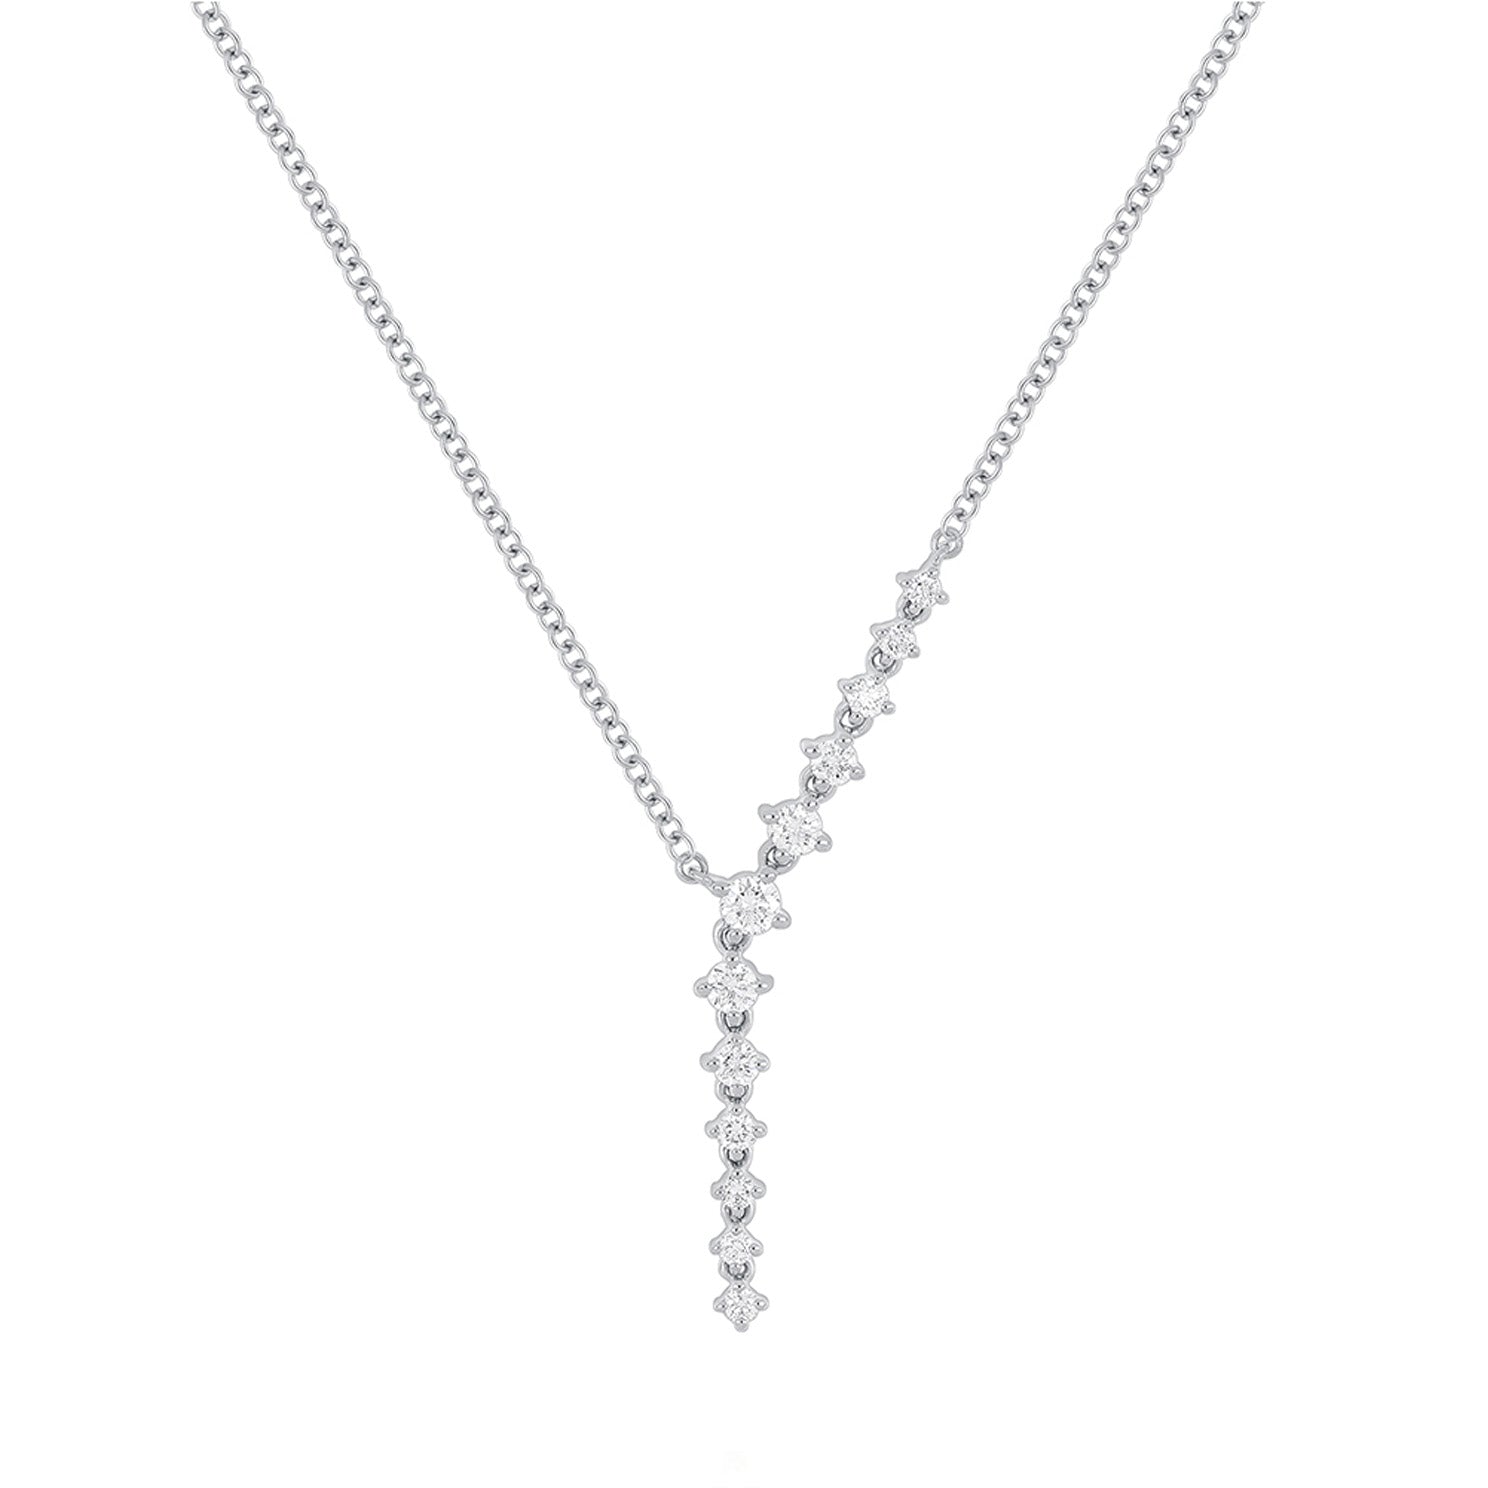 EF Collection 2 Chain Extender - White Gold - Necklaces - Broken English Jewelry